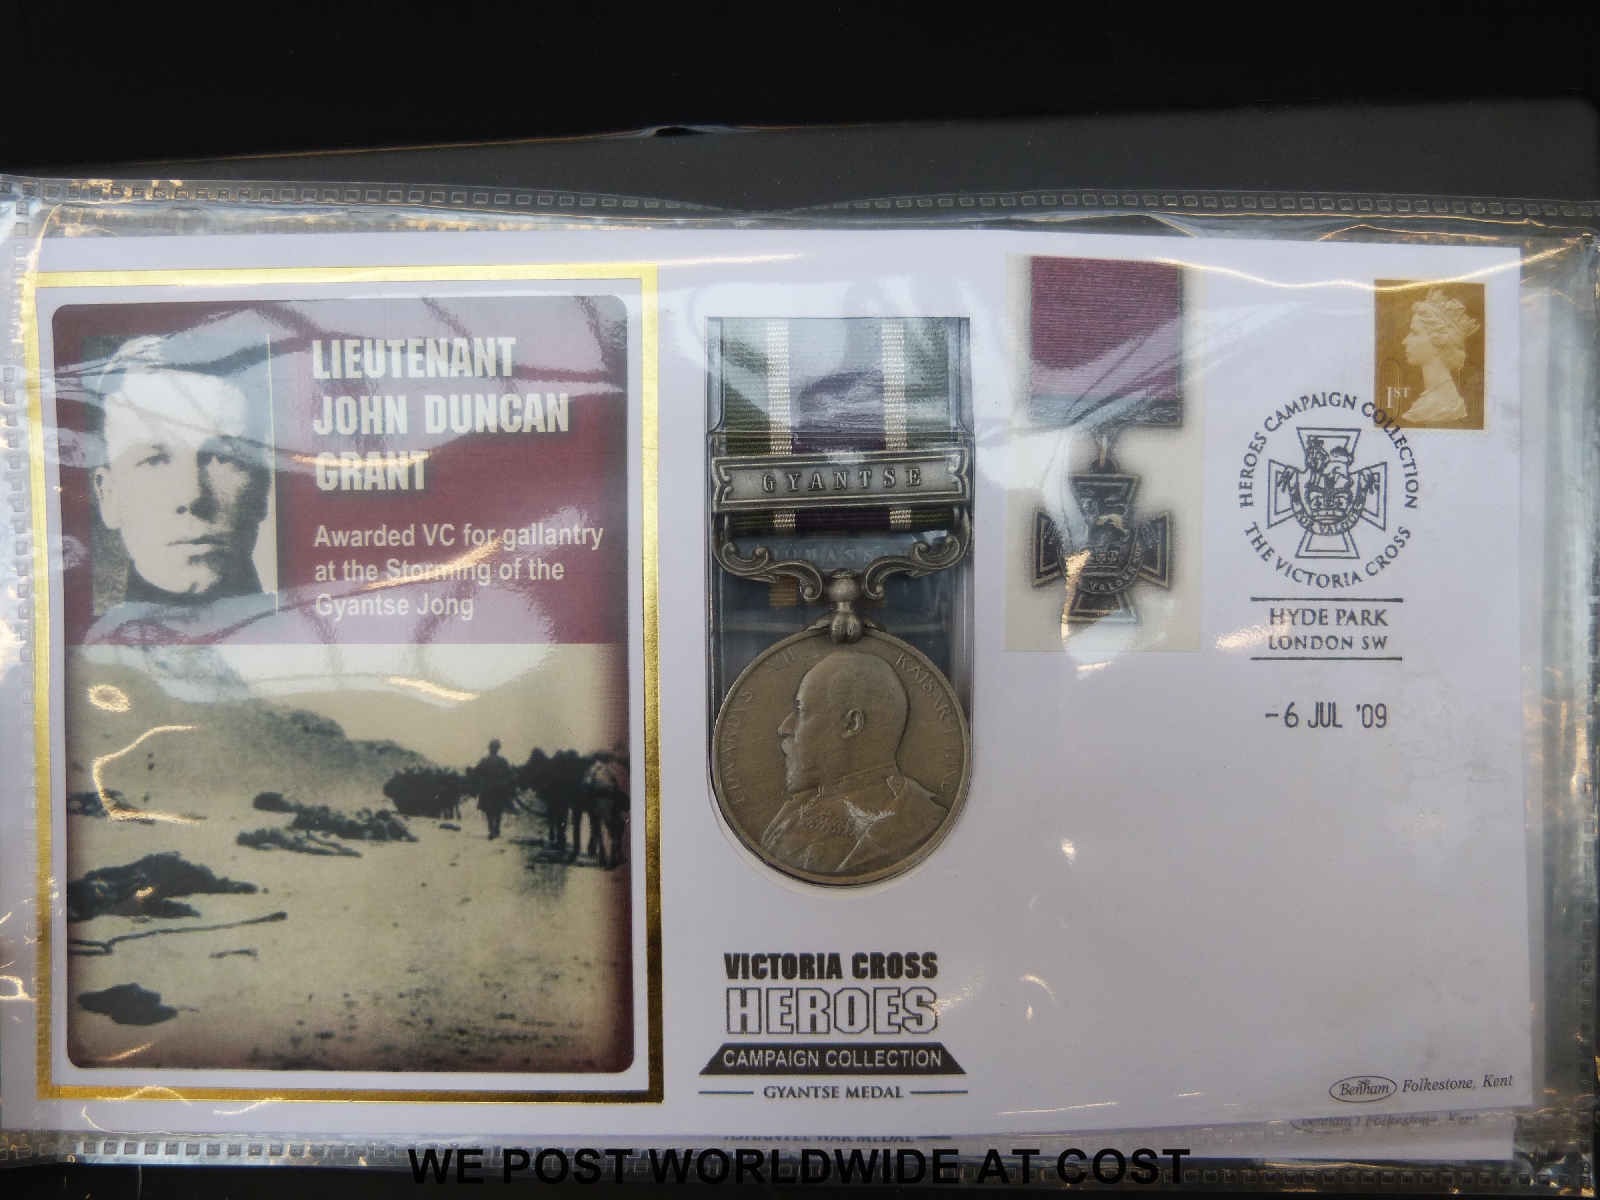 An album of stamp covers relating to the Victoria Cross Heroes Campaign Collection - Image 4 of 4